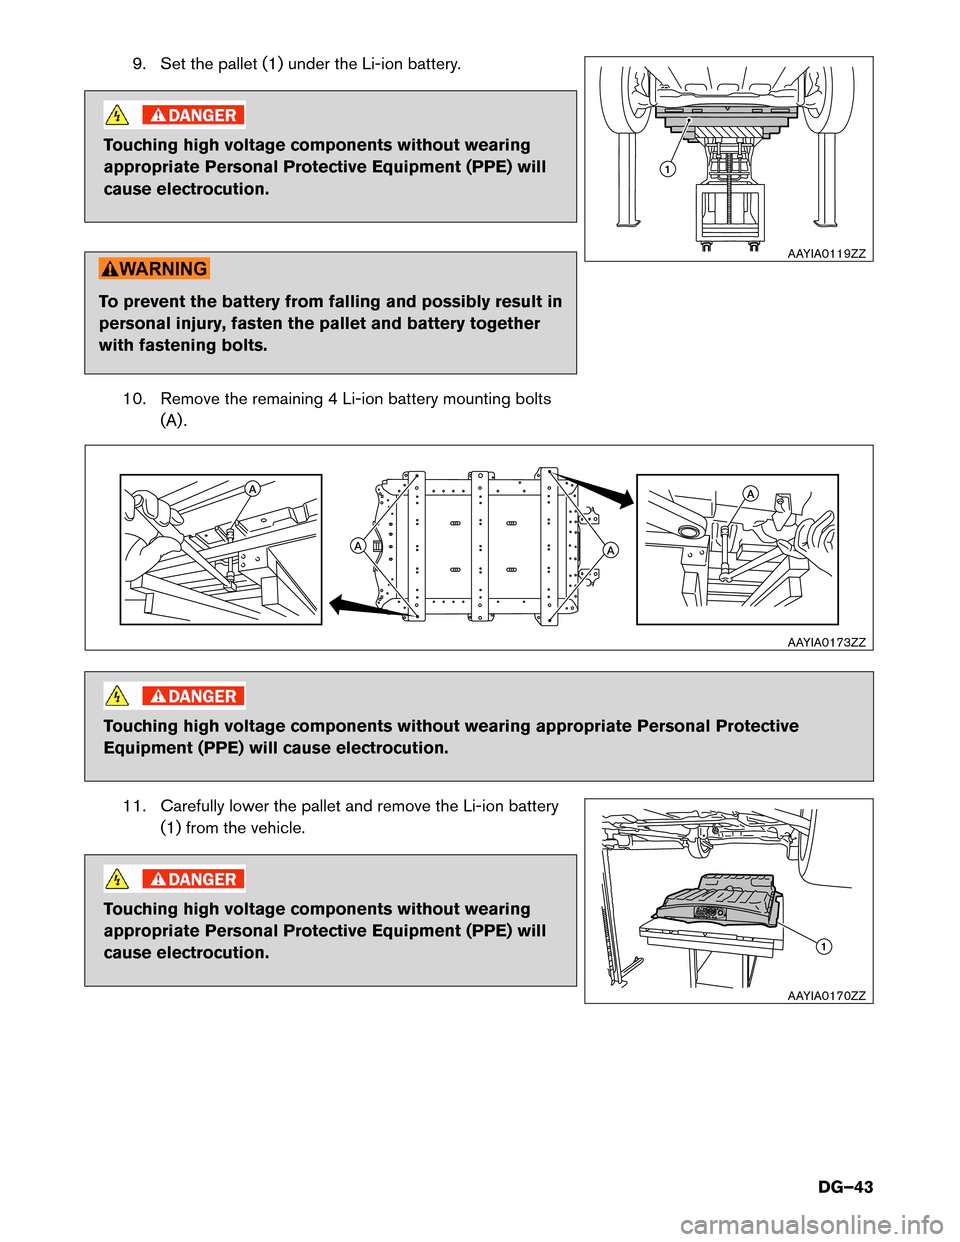 NISSAN LEAF 2015 1.G Dismantling Guide 9. Set the pallet (1) under the Li-ion battery.
Touching high voltage components without wearing
appropriate
Personal Protective Equipment (PPE) will
cause electrocution. To prevent the battery from f